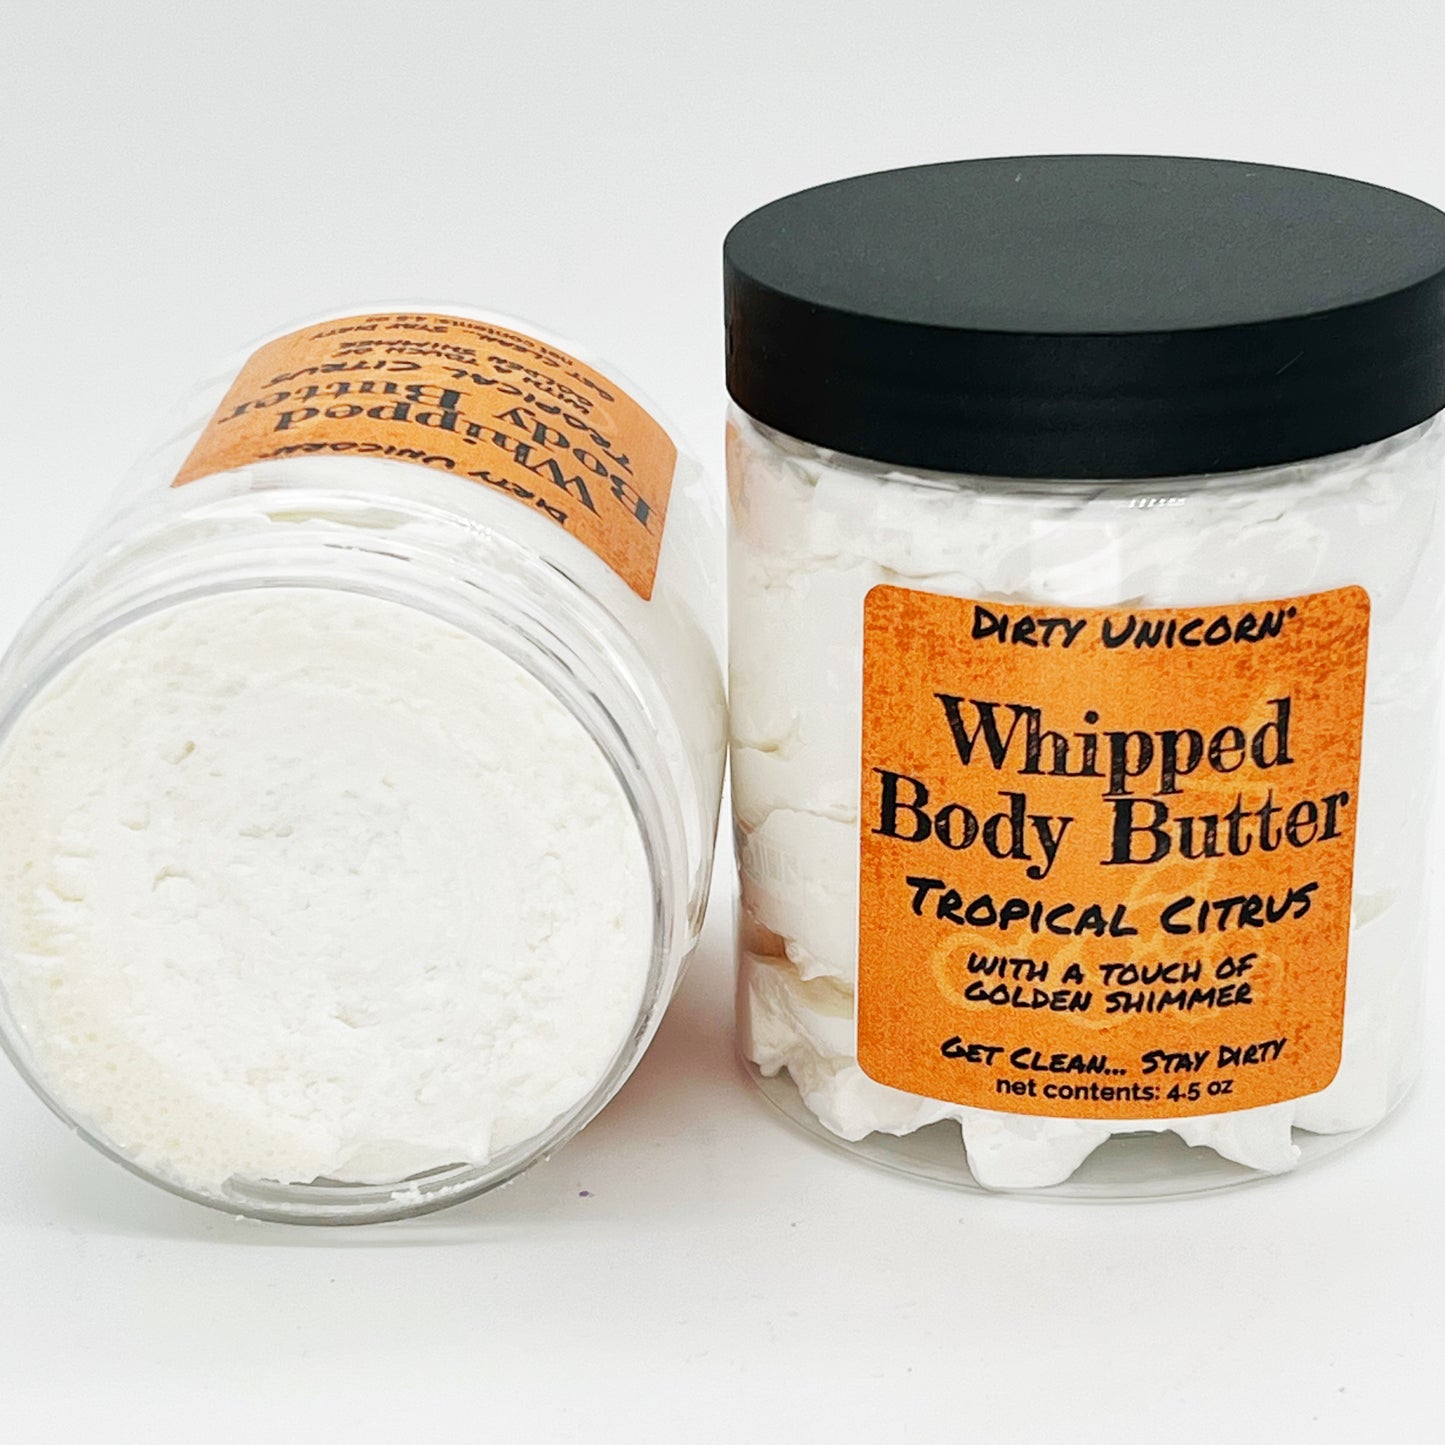 Tropical Citrus Whipped Body Butter